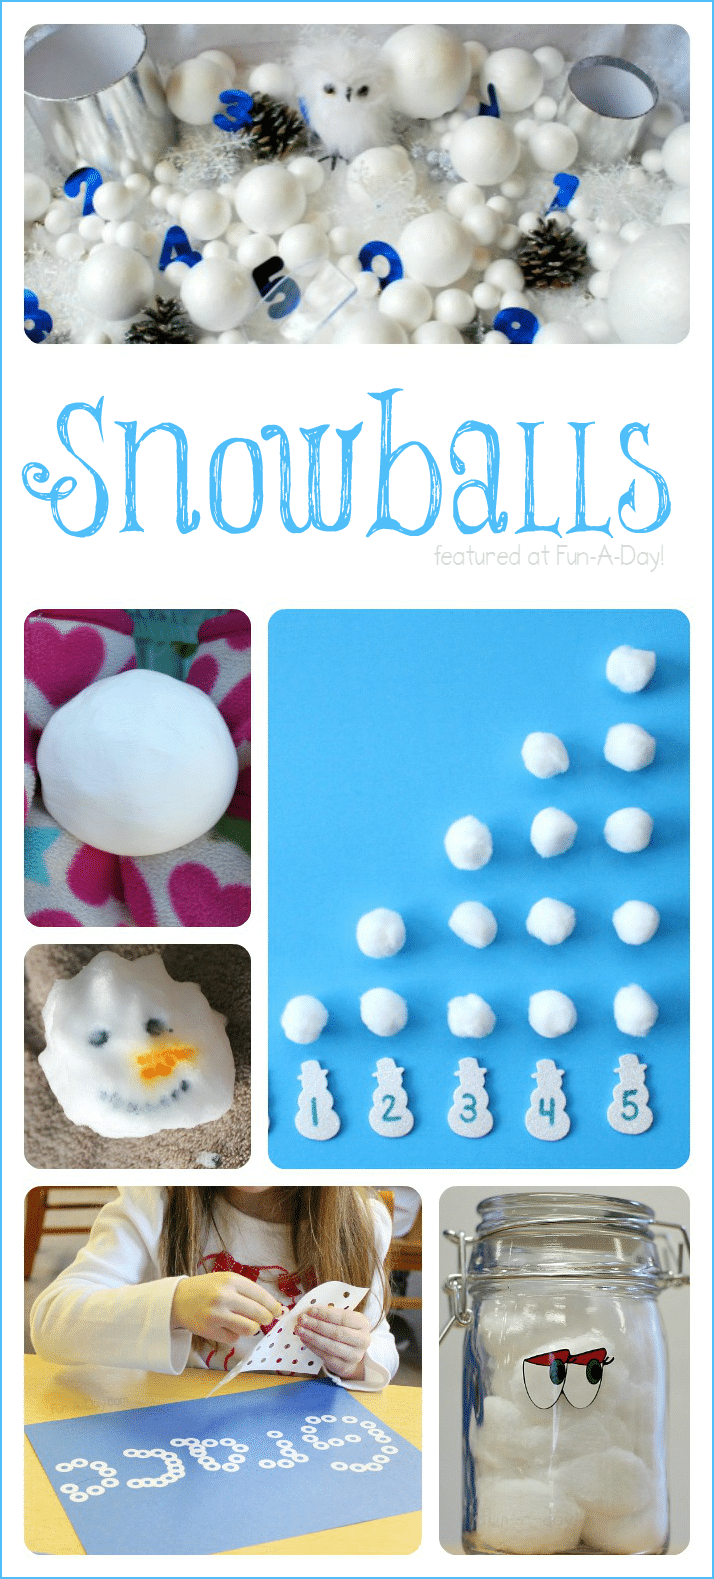 Winter activities for kids - Playful learning with snowballs!